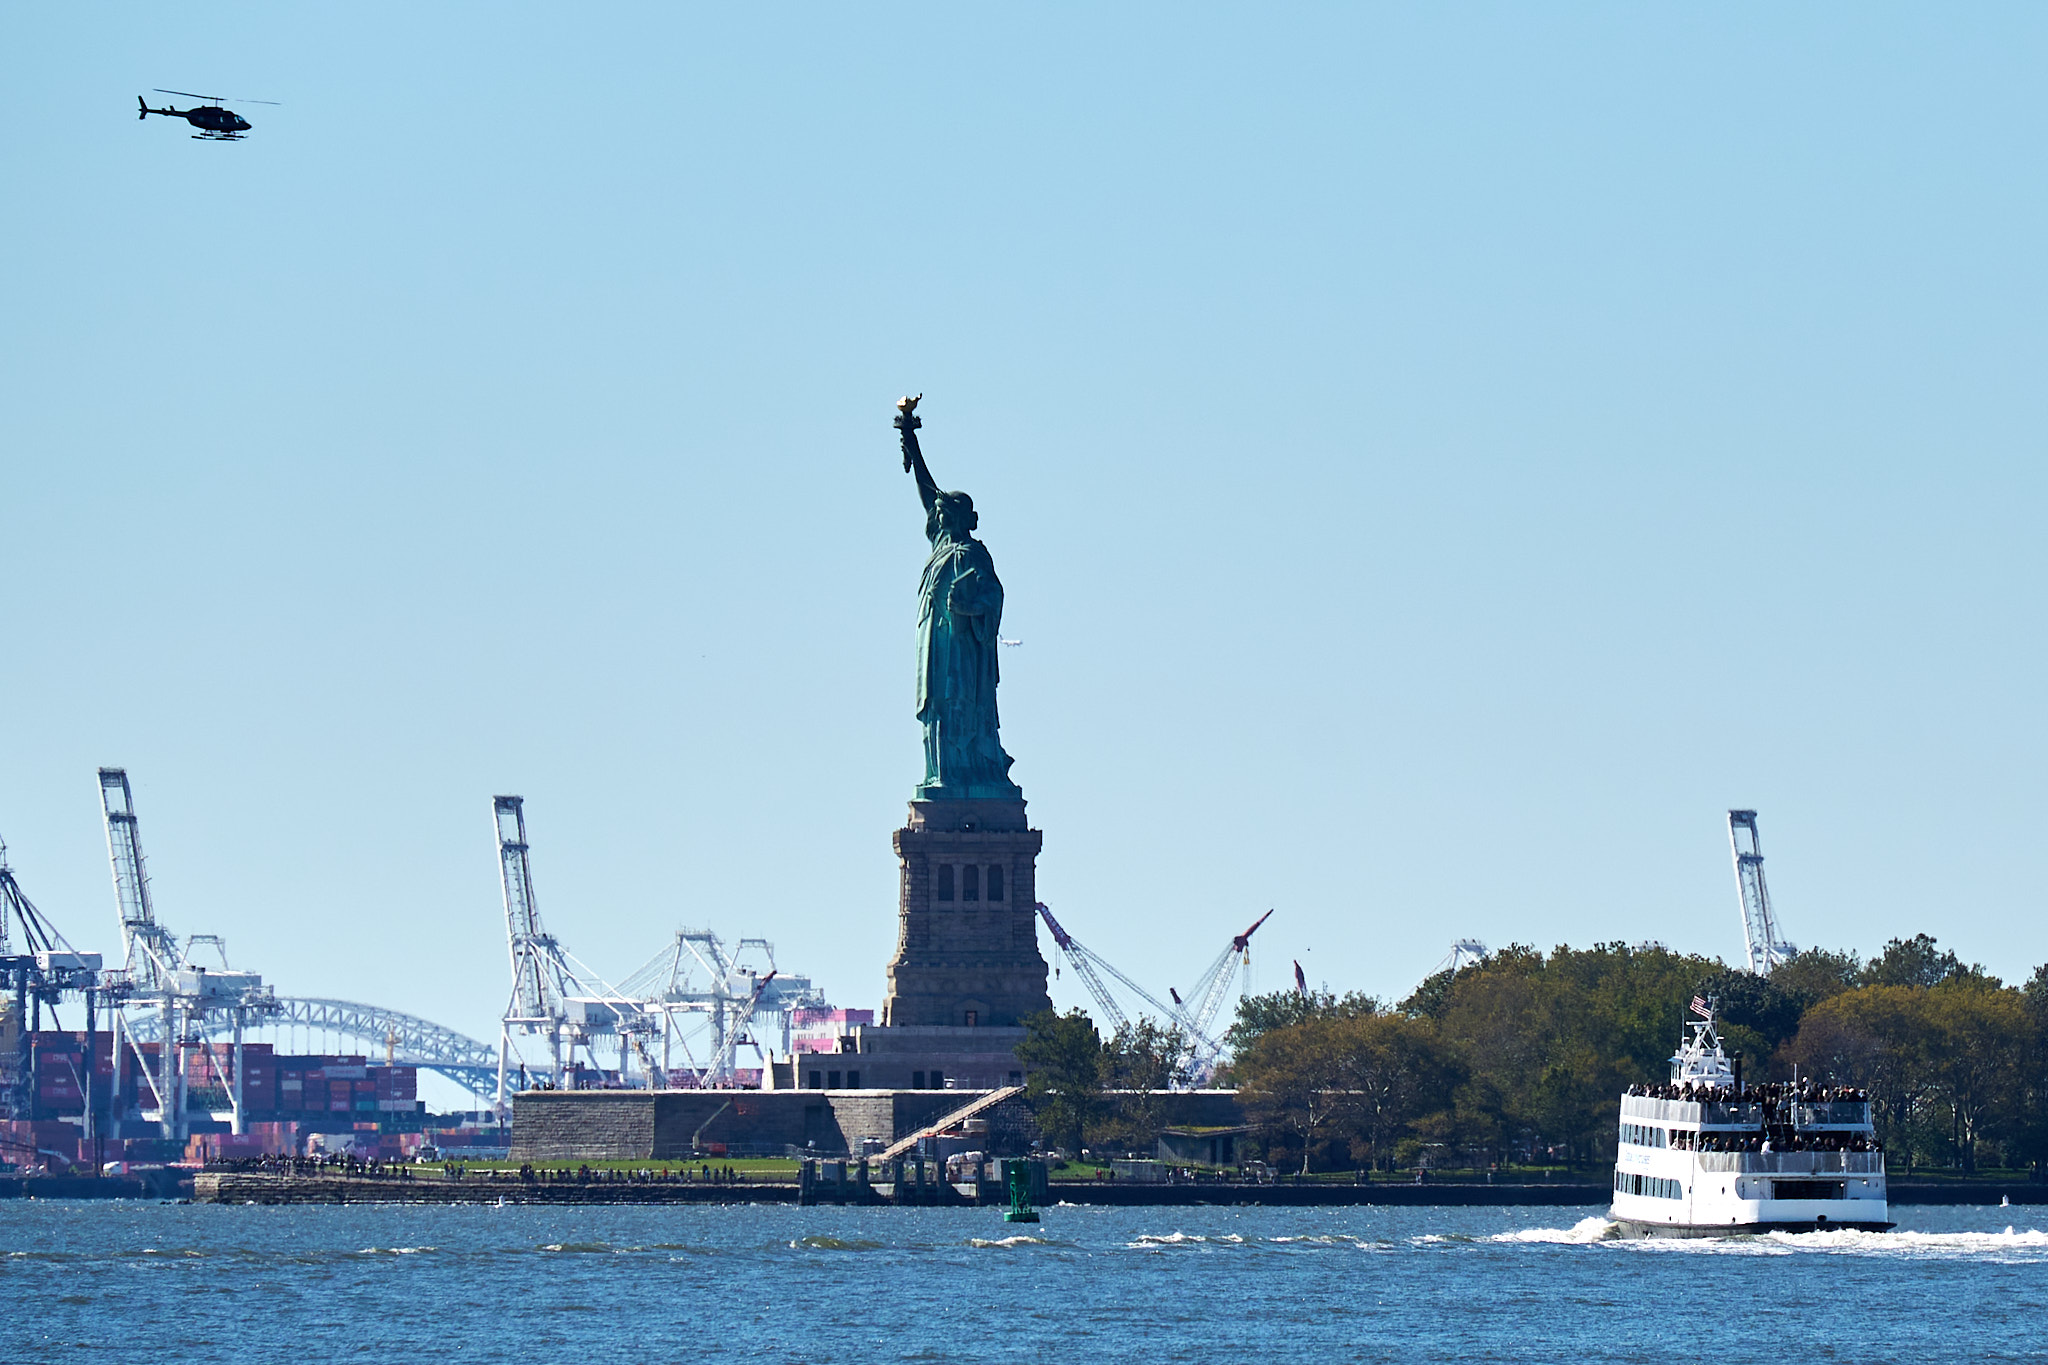 Helicopters, Ships, and Planes (see white spot behind the Statue of Liberty)!